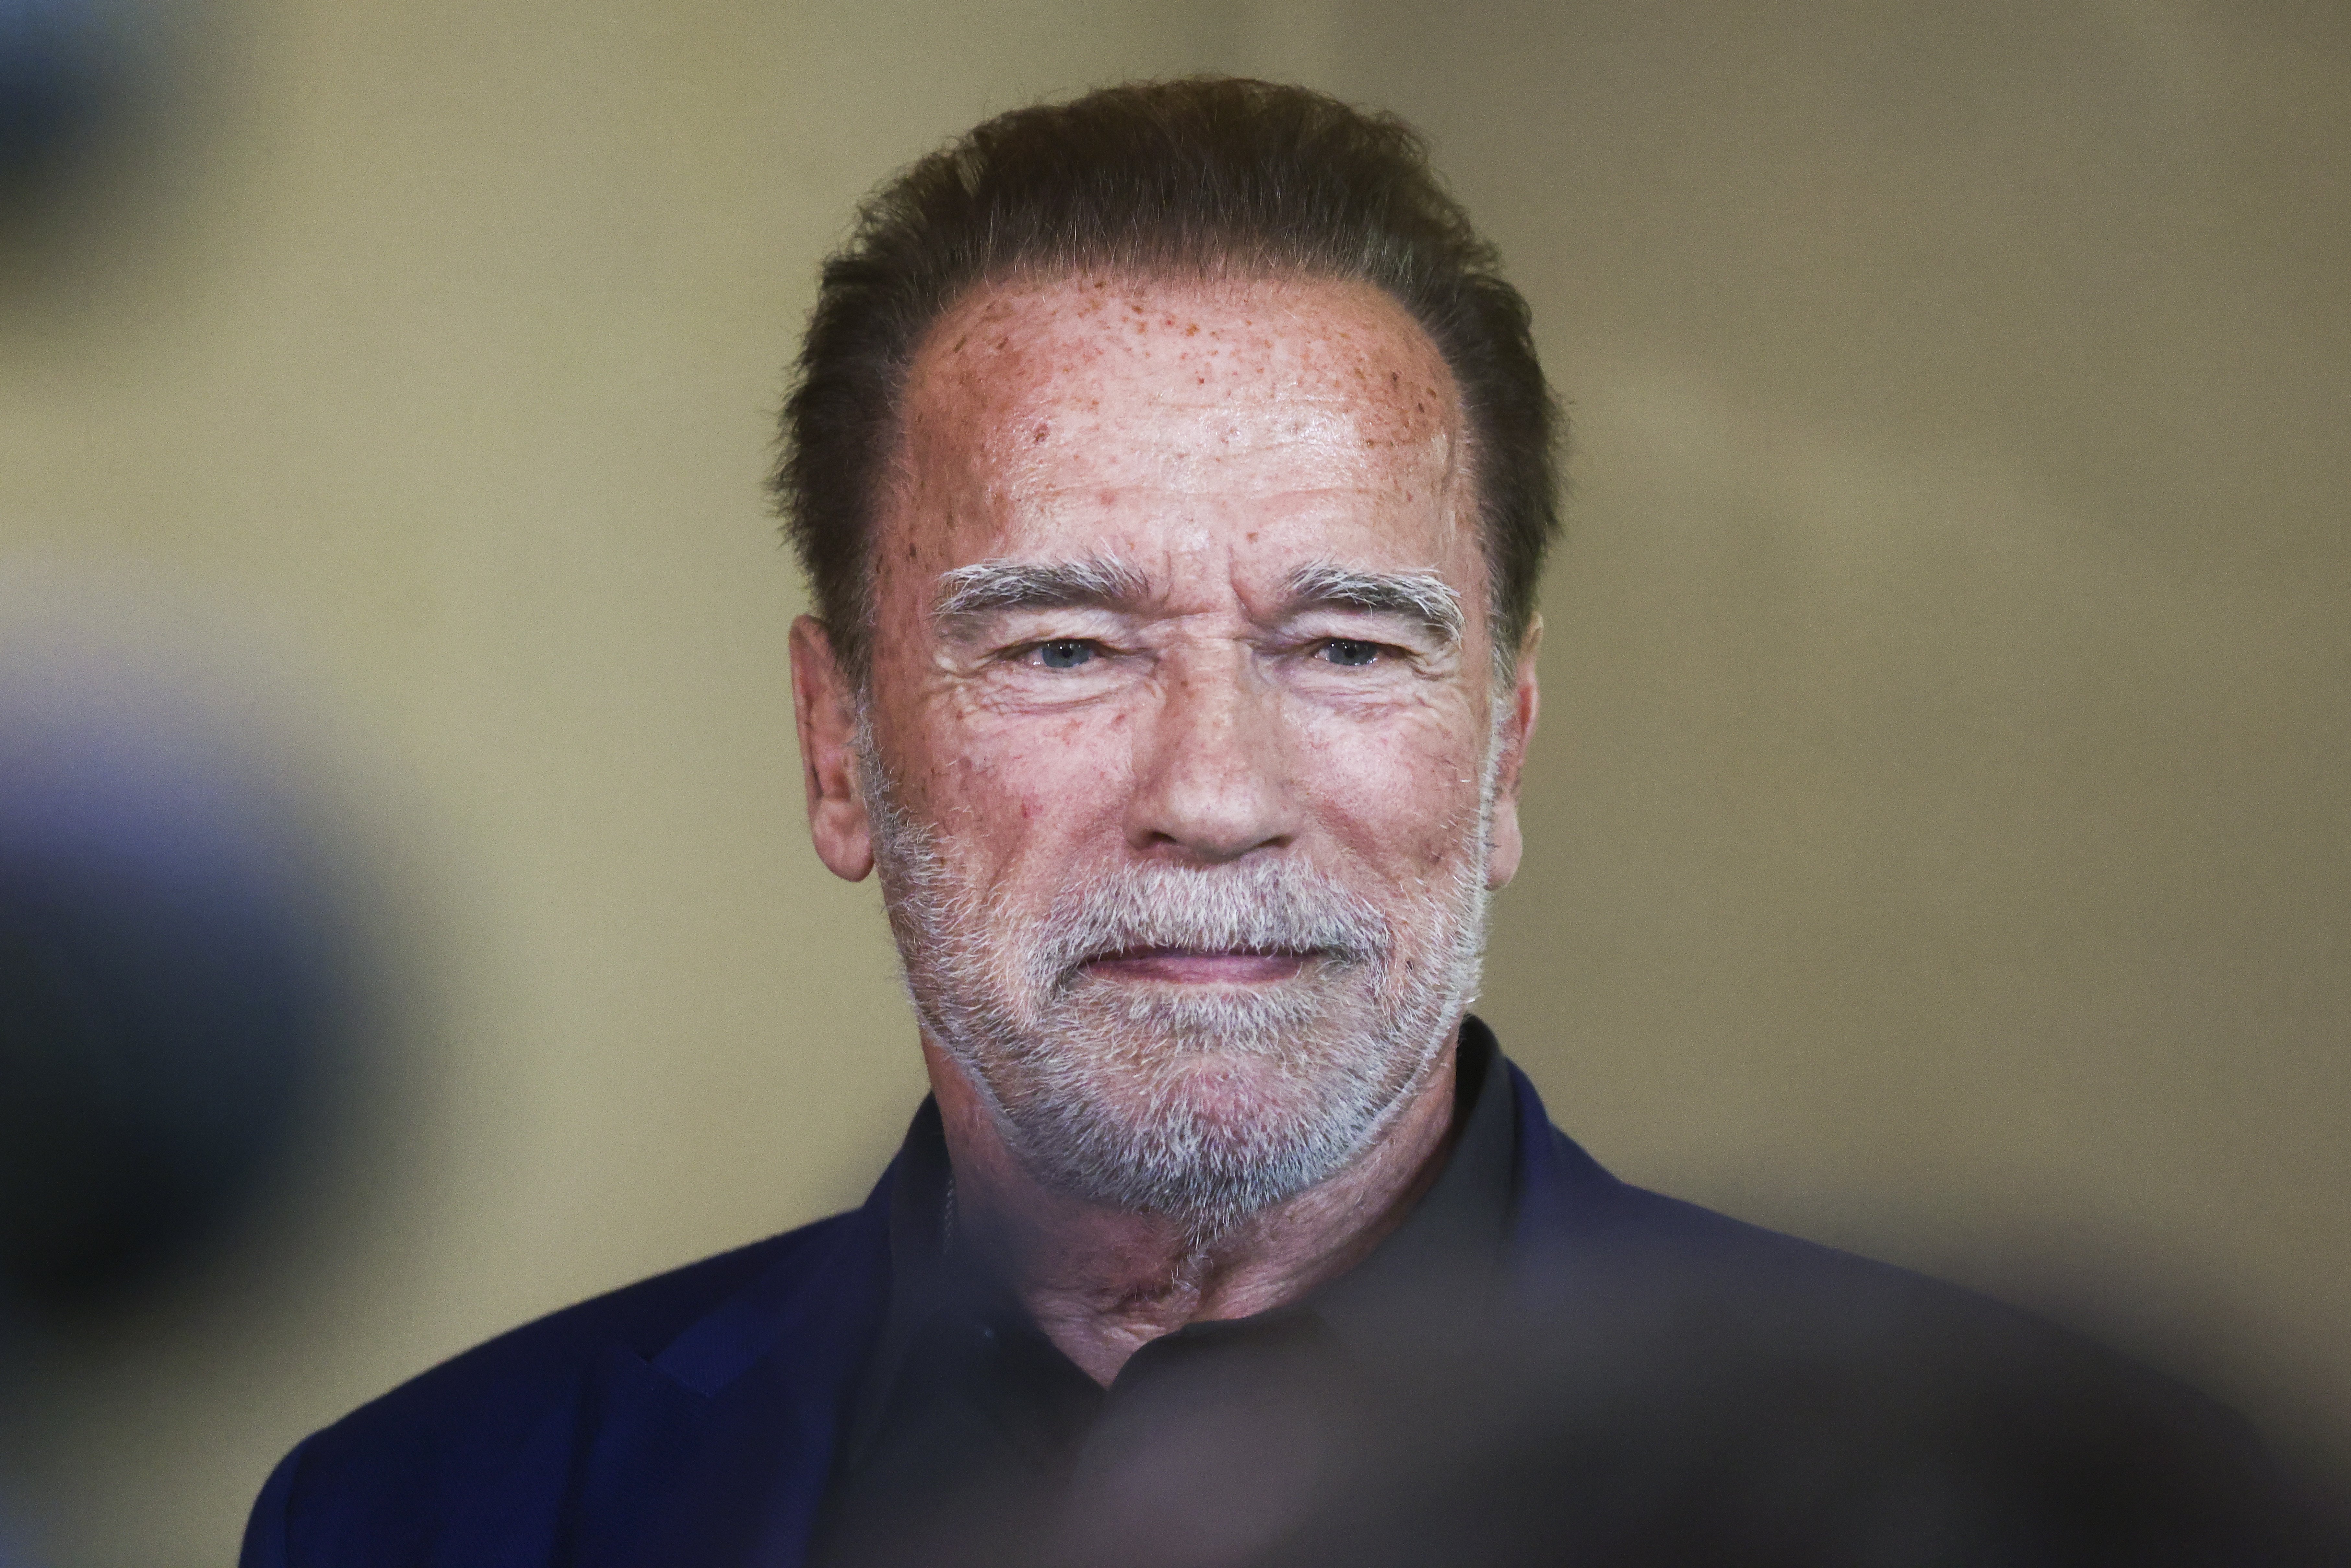 Arnold Schwarzenegger seen inside a former synagogue that is now home to the Auschwitz Jewish Center Foundation in Oswiecim, Poland, on September 28, 2022 | Source: Getty Images